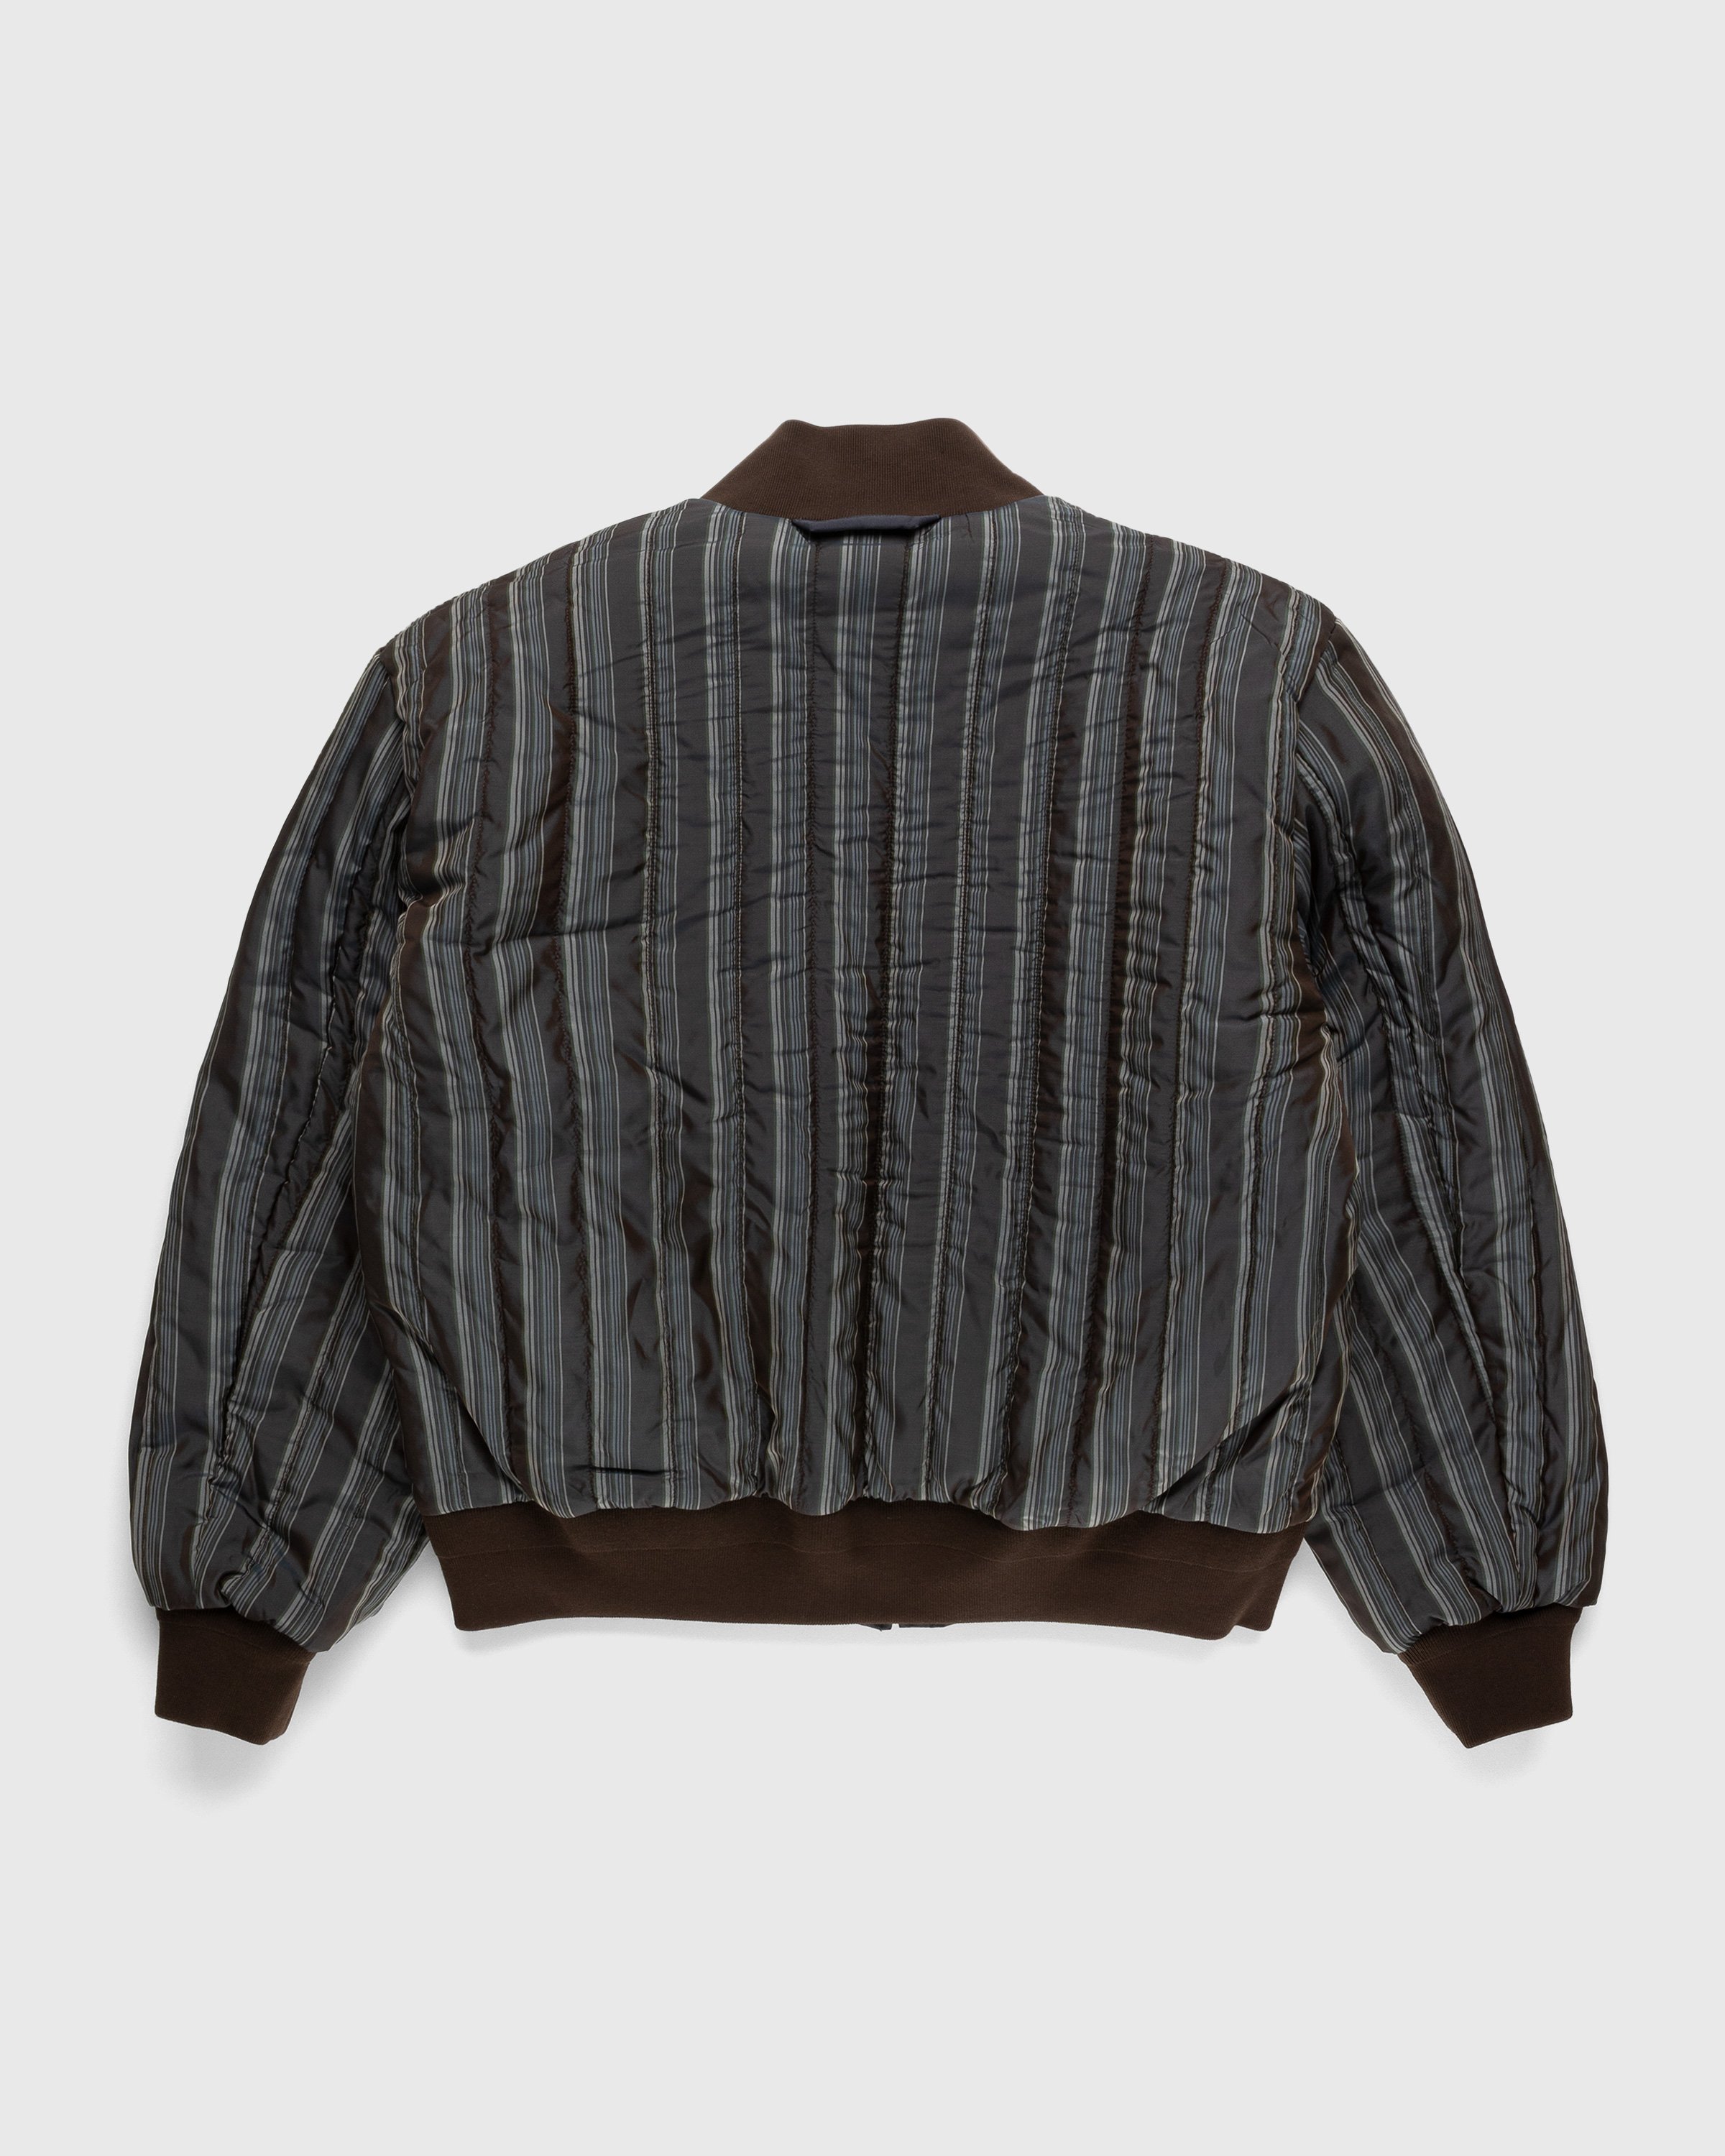 Acne Studios - Reversible Patch Bomber Jacket Anthracite Grey - Clothing - Brown - Image 6